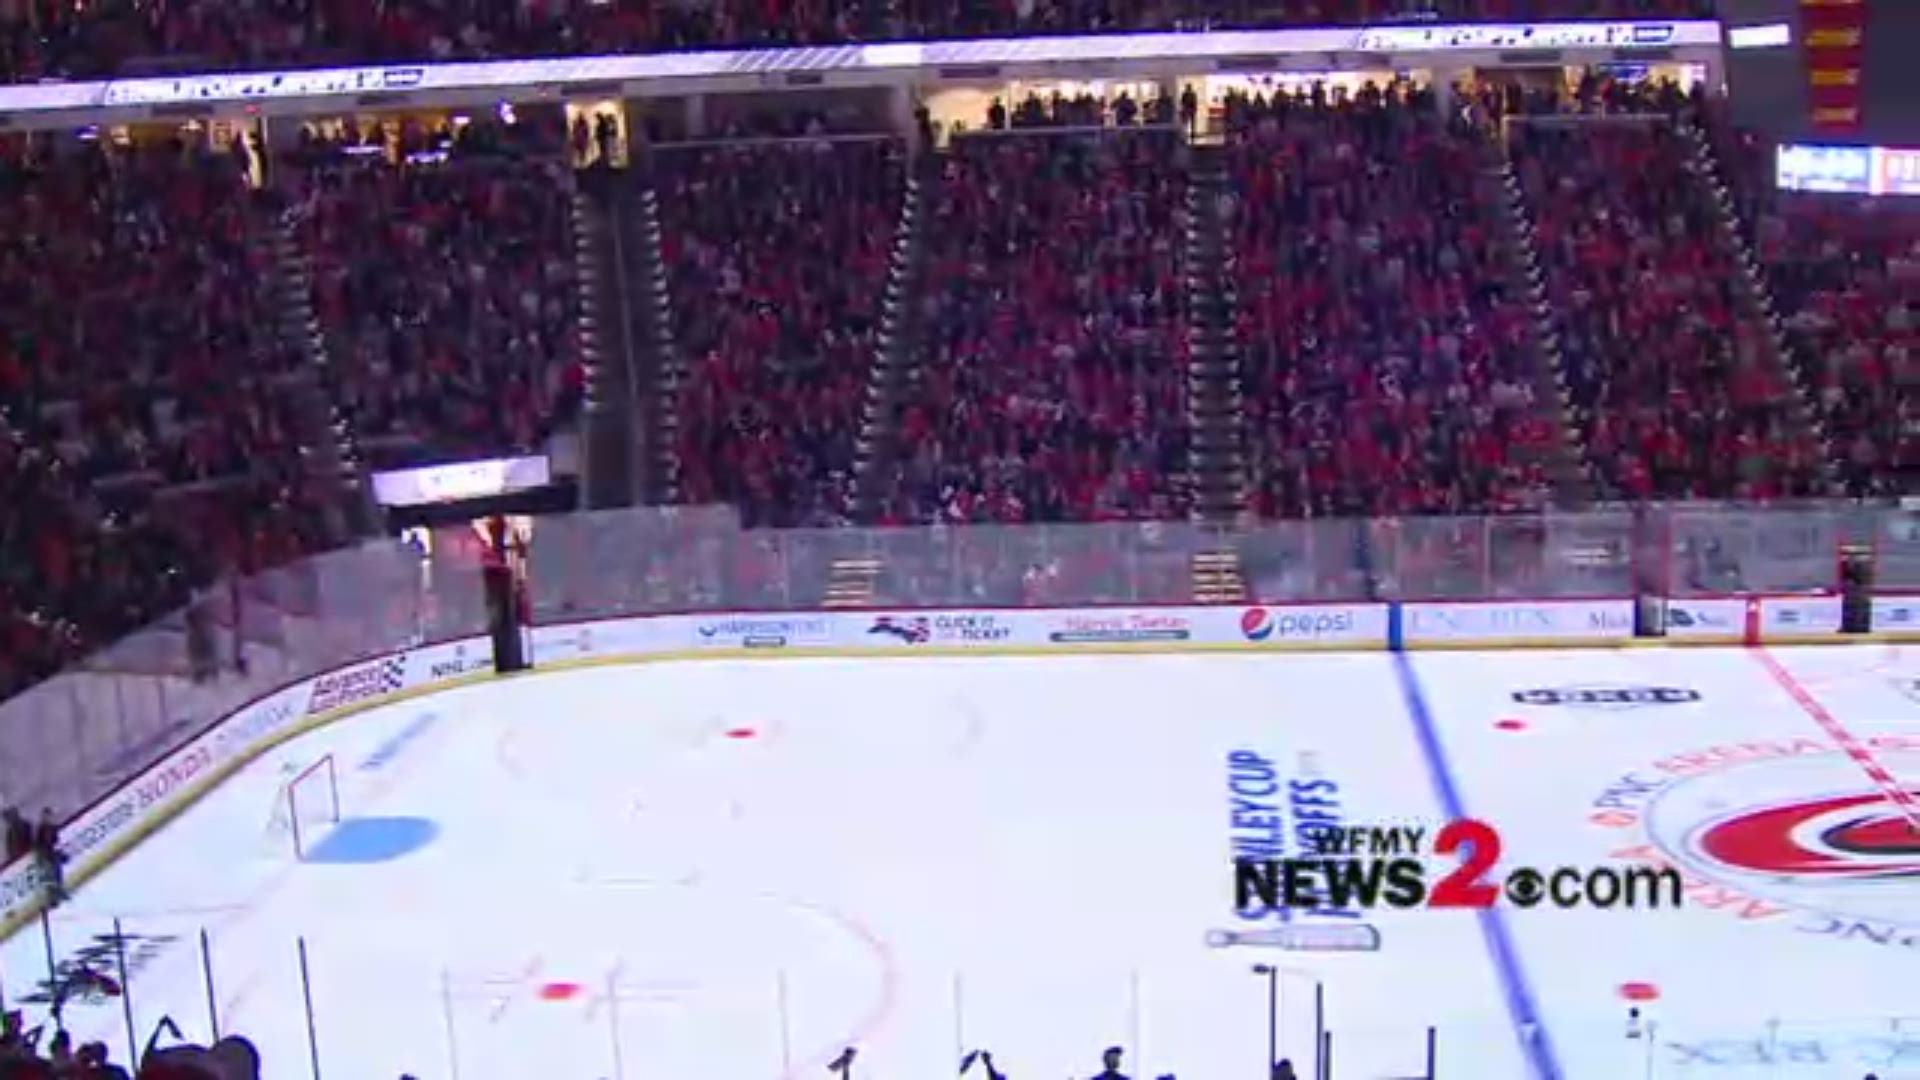 Hurricanes fans pack the house at PNC Arena as the Canes go up against the Capitals for their first playoff game in Raleigh.